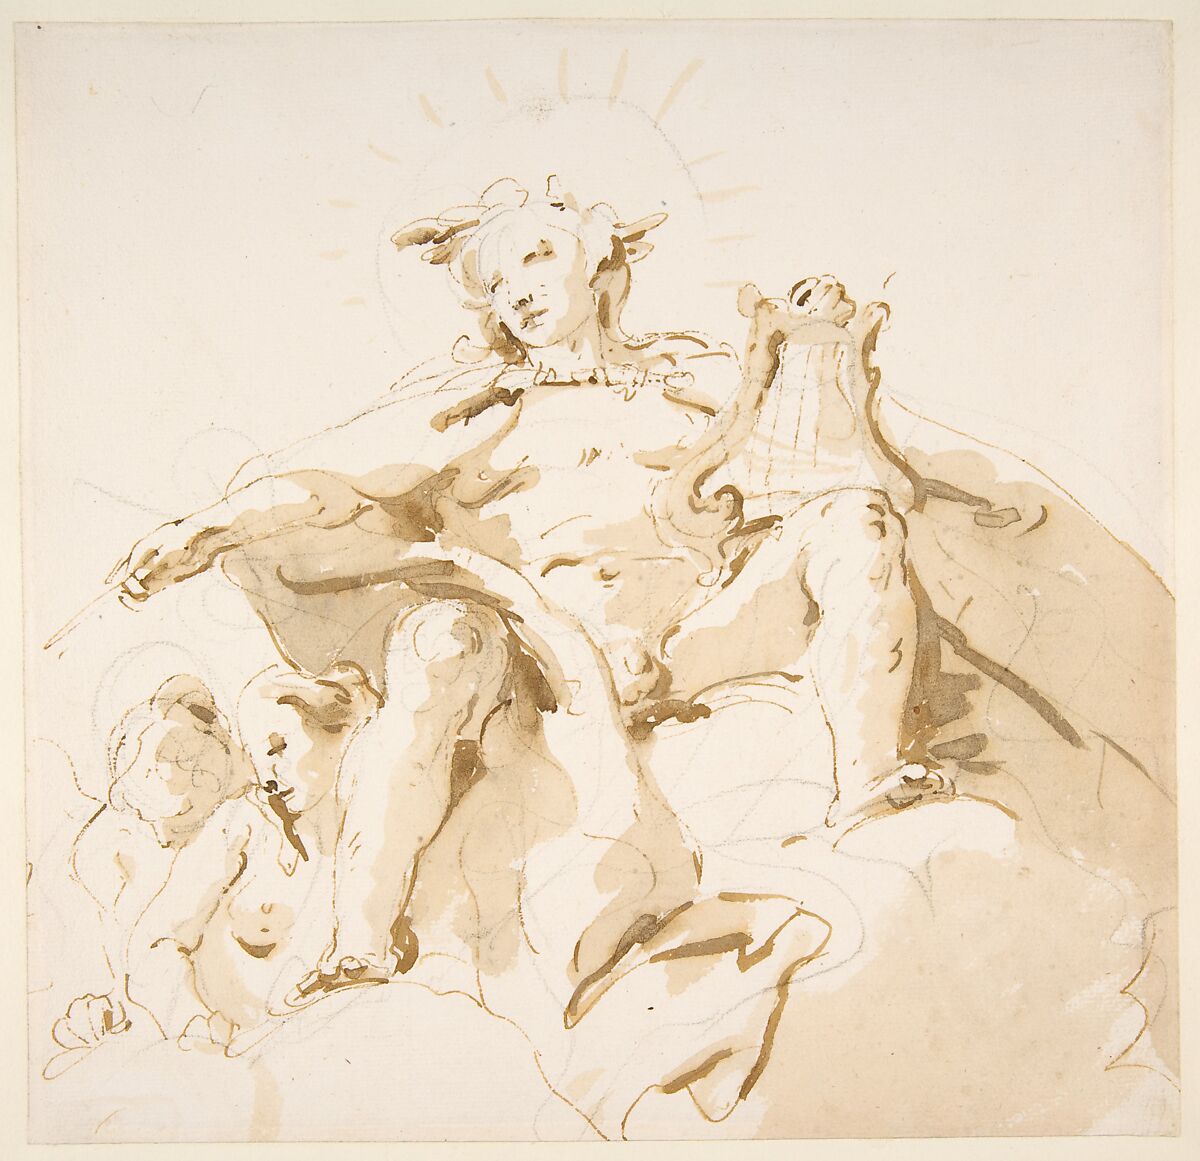 Apollo Seated on Clouds, Two Figures at Left, Giovanni Battista Tiepolo (Italian, Venice 1696–1770 Madrid), Pen and brown ink, brush with pale and dark brown wash, over black chalk 